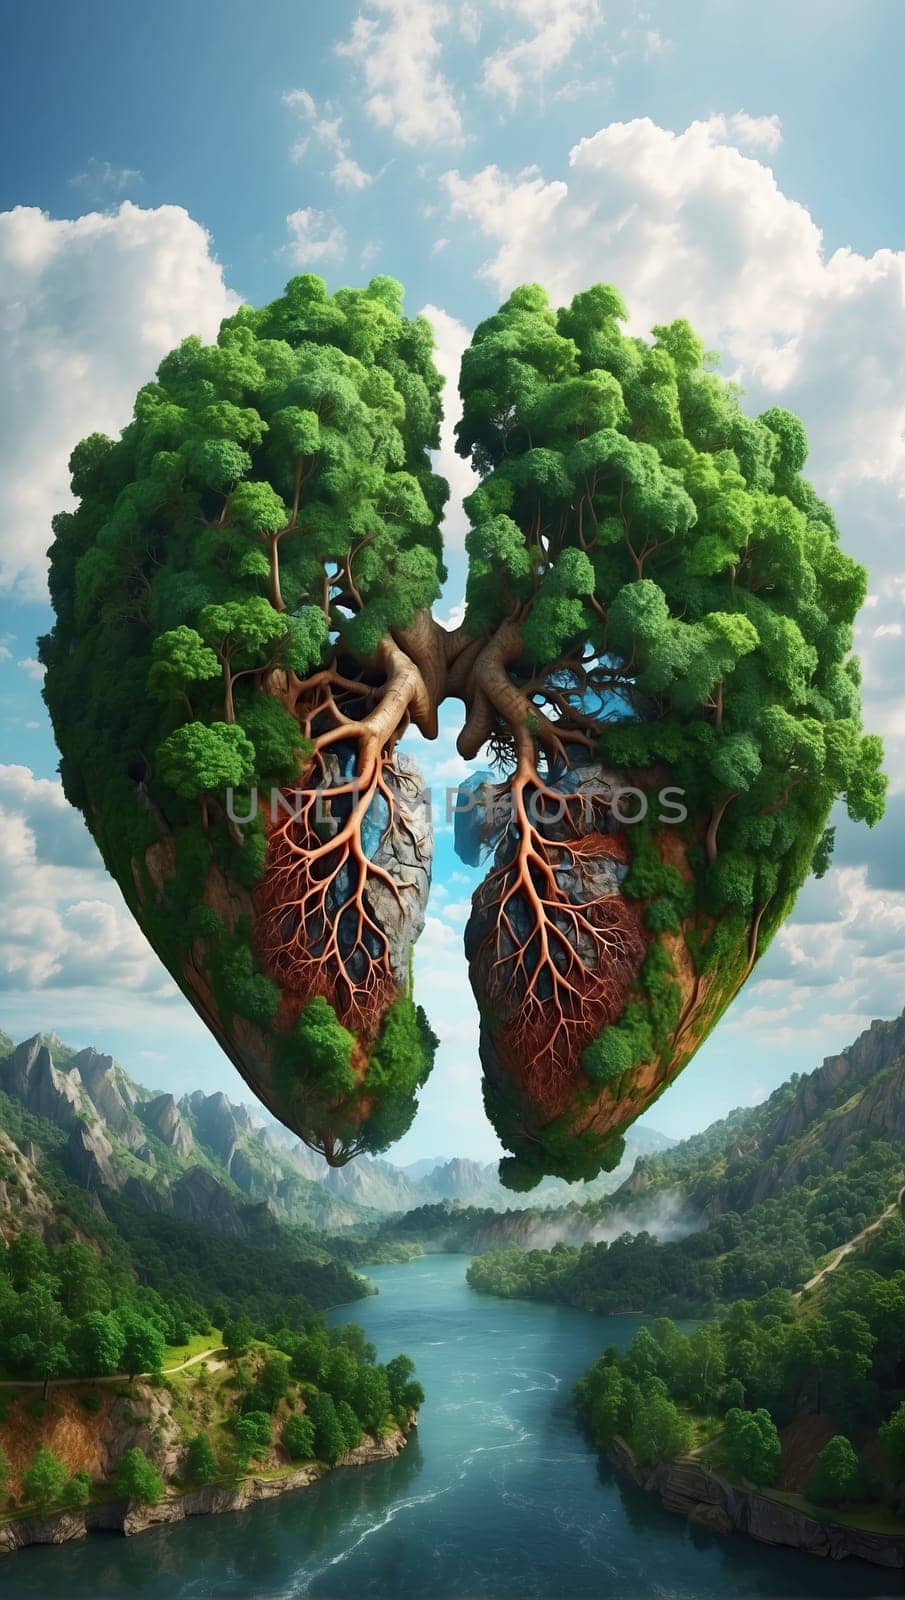 Green lungs of the planet by applesstock